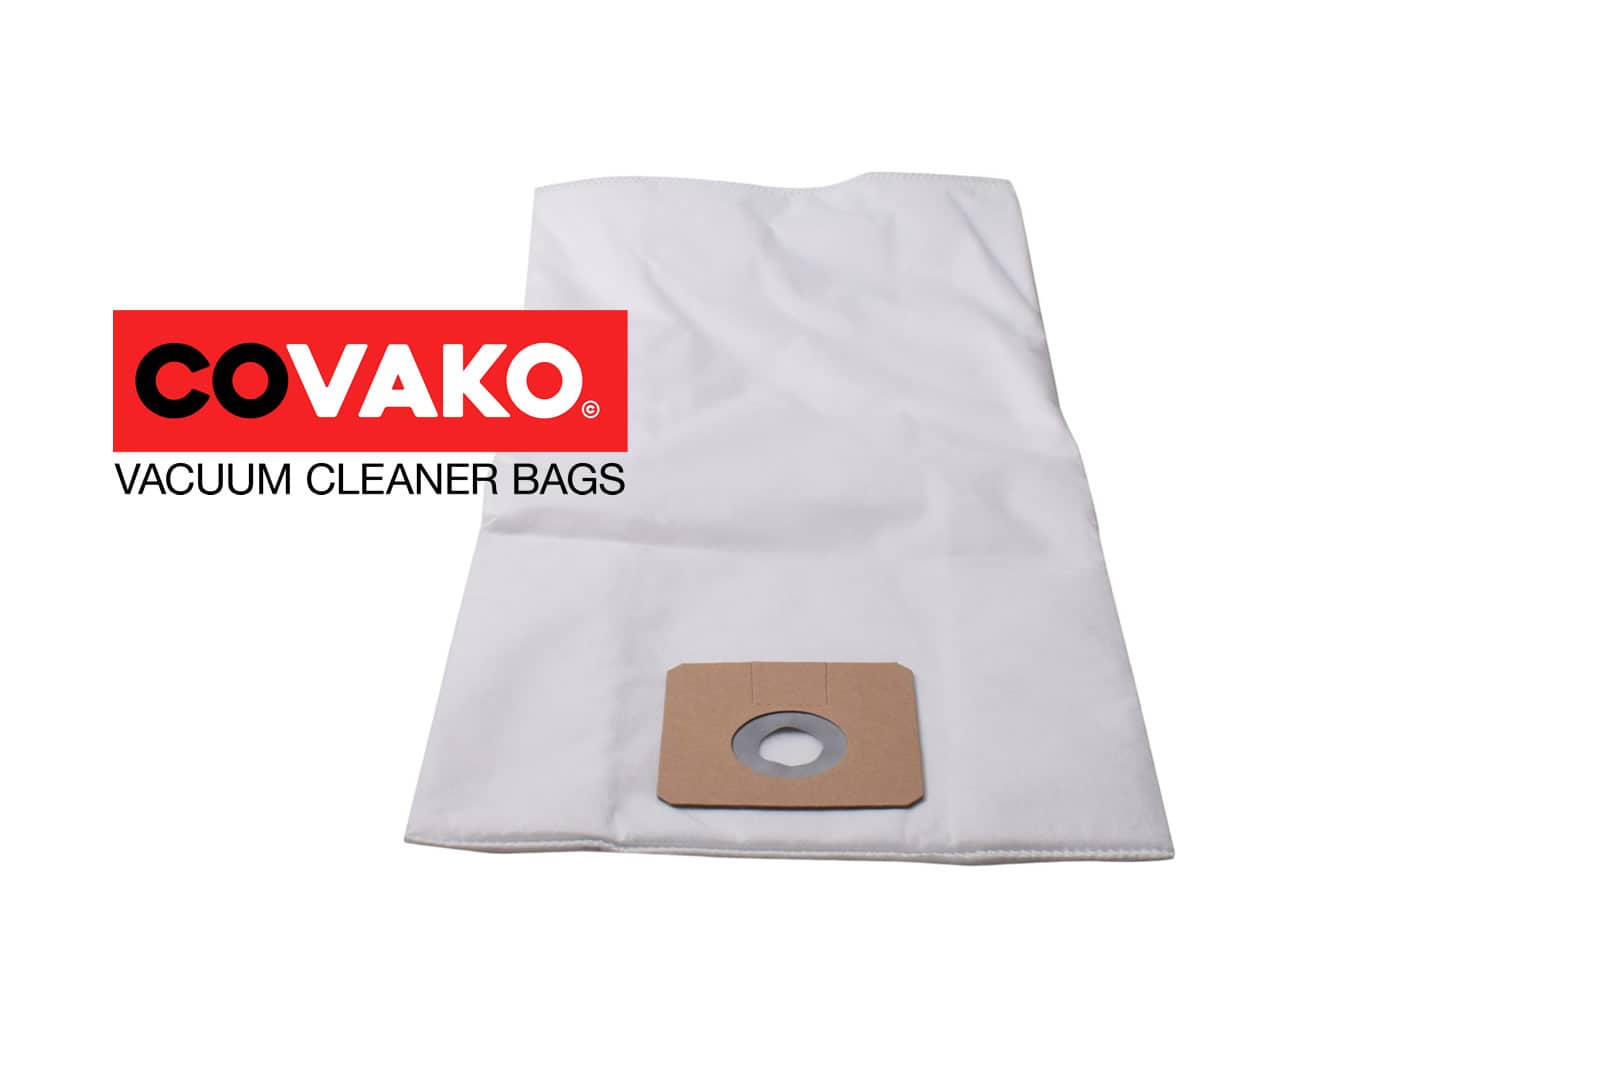 Ecolab S 22 / Synthesis - Ecolab vacuum cleaner bags